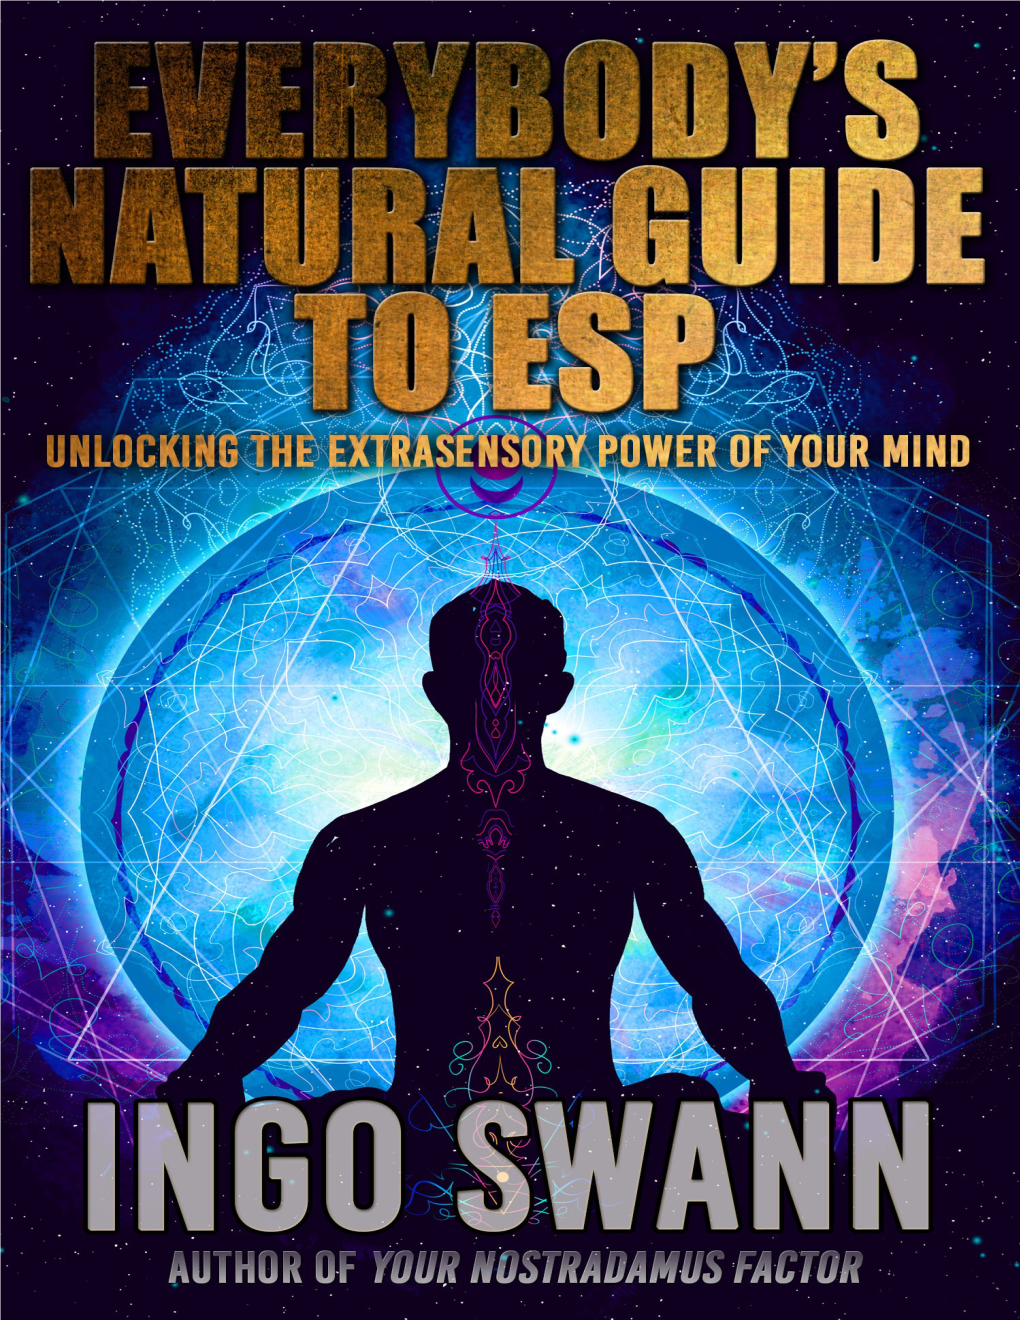 EVERYBODY's GUIDE to NATURAL ESP: Jeremy Tarcher, Inc